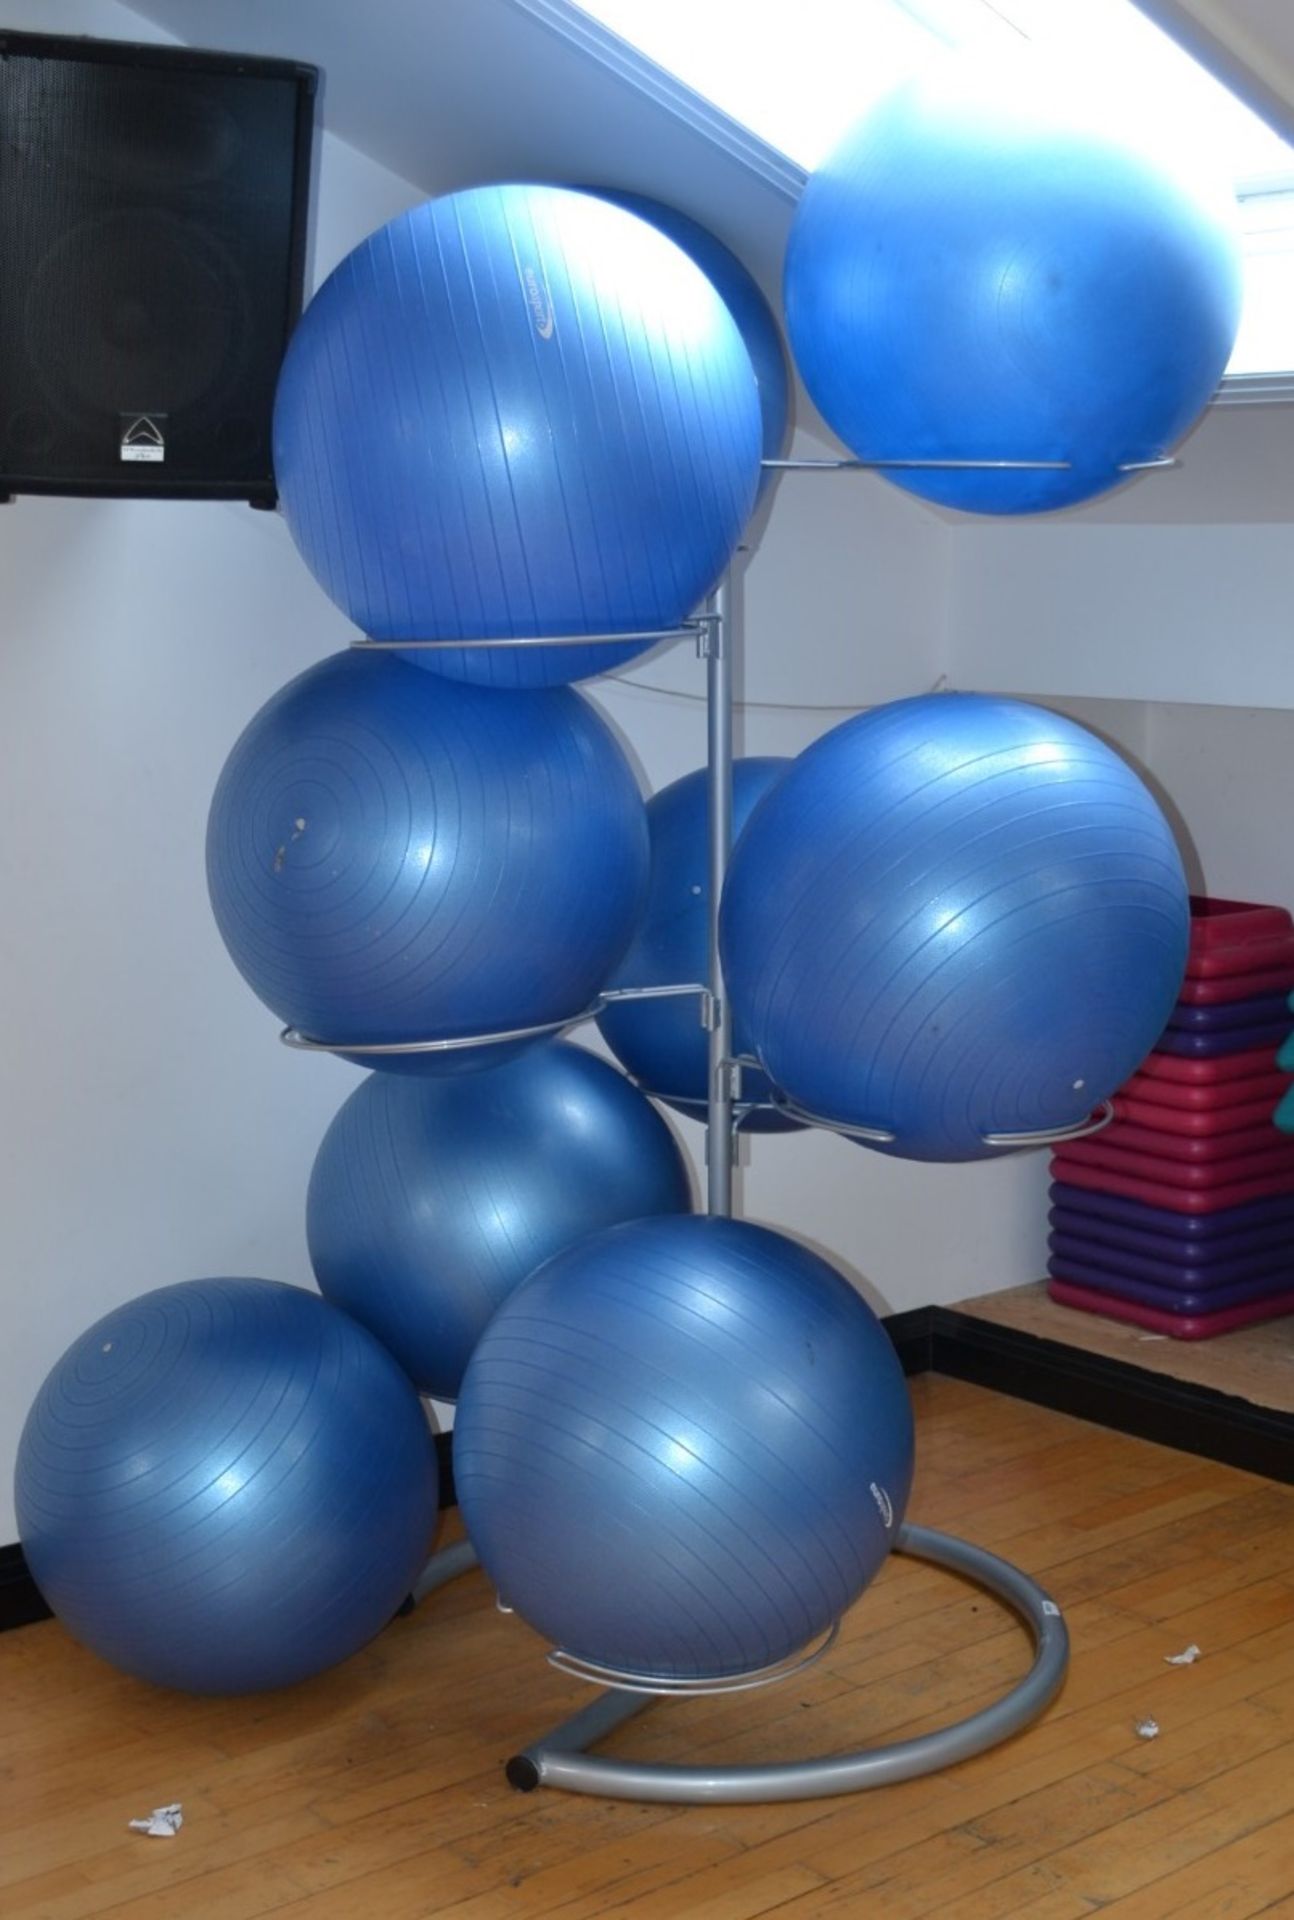 1 x Exercise Ball Holder With 9 x Exercise Balls - Dimensions: H180 x L100cm - Ref: J2011/1FDS -